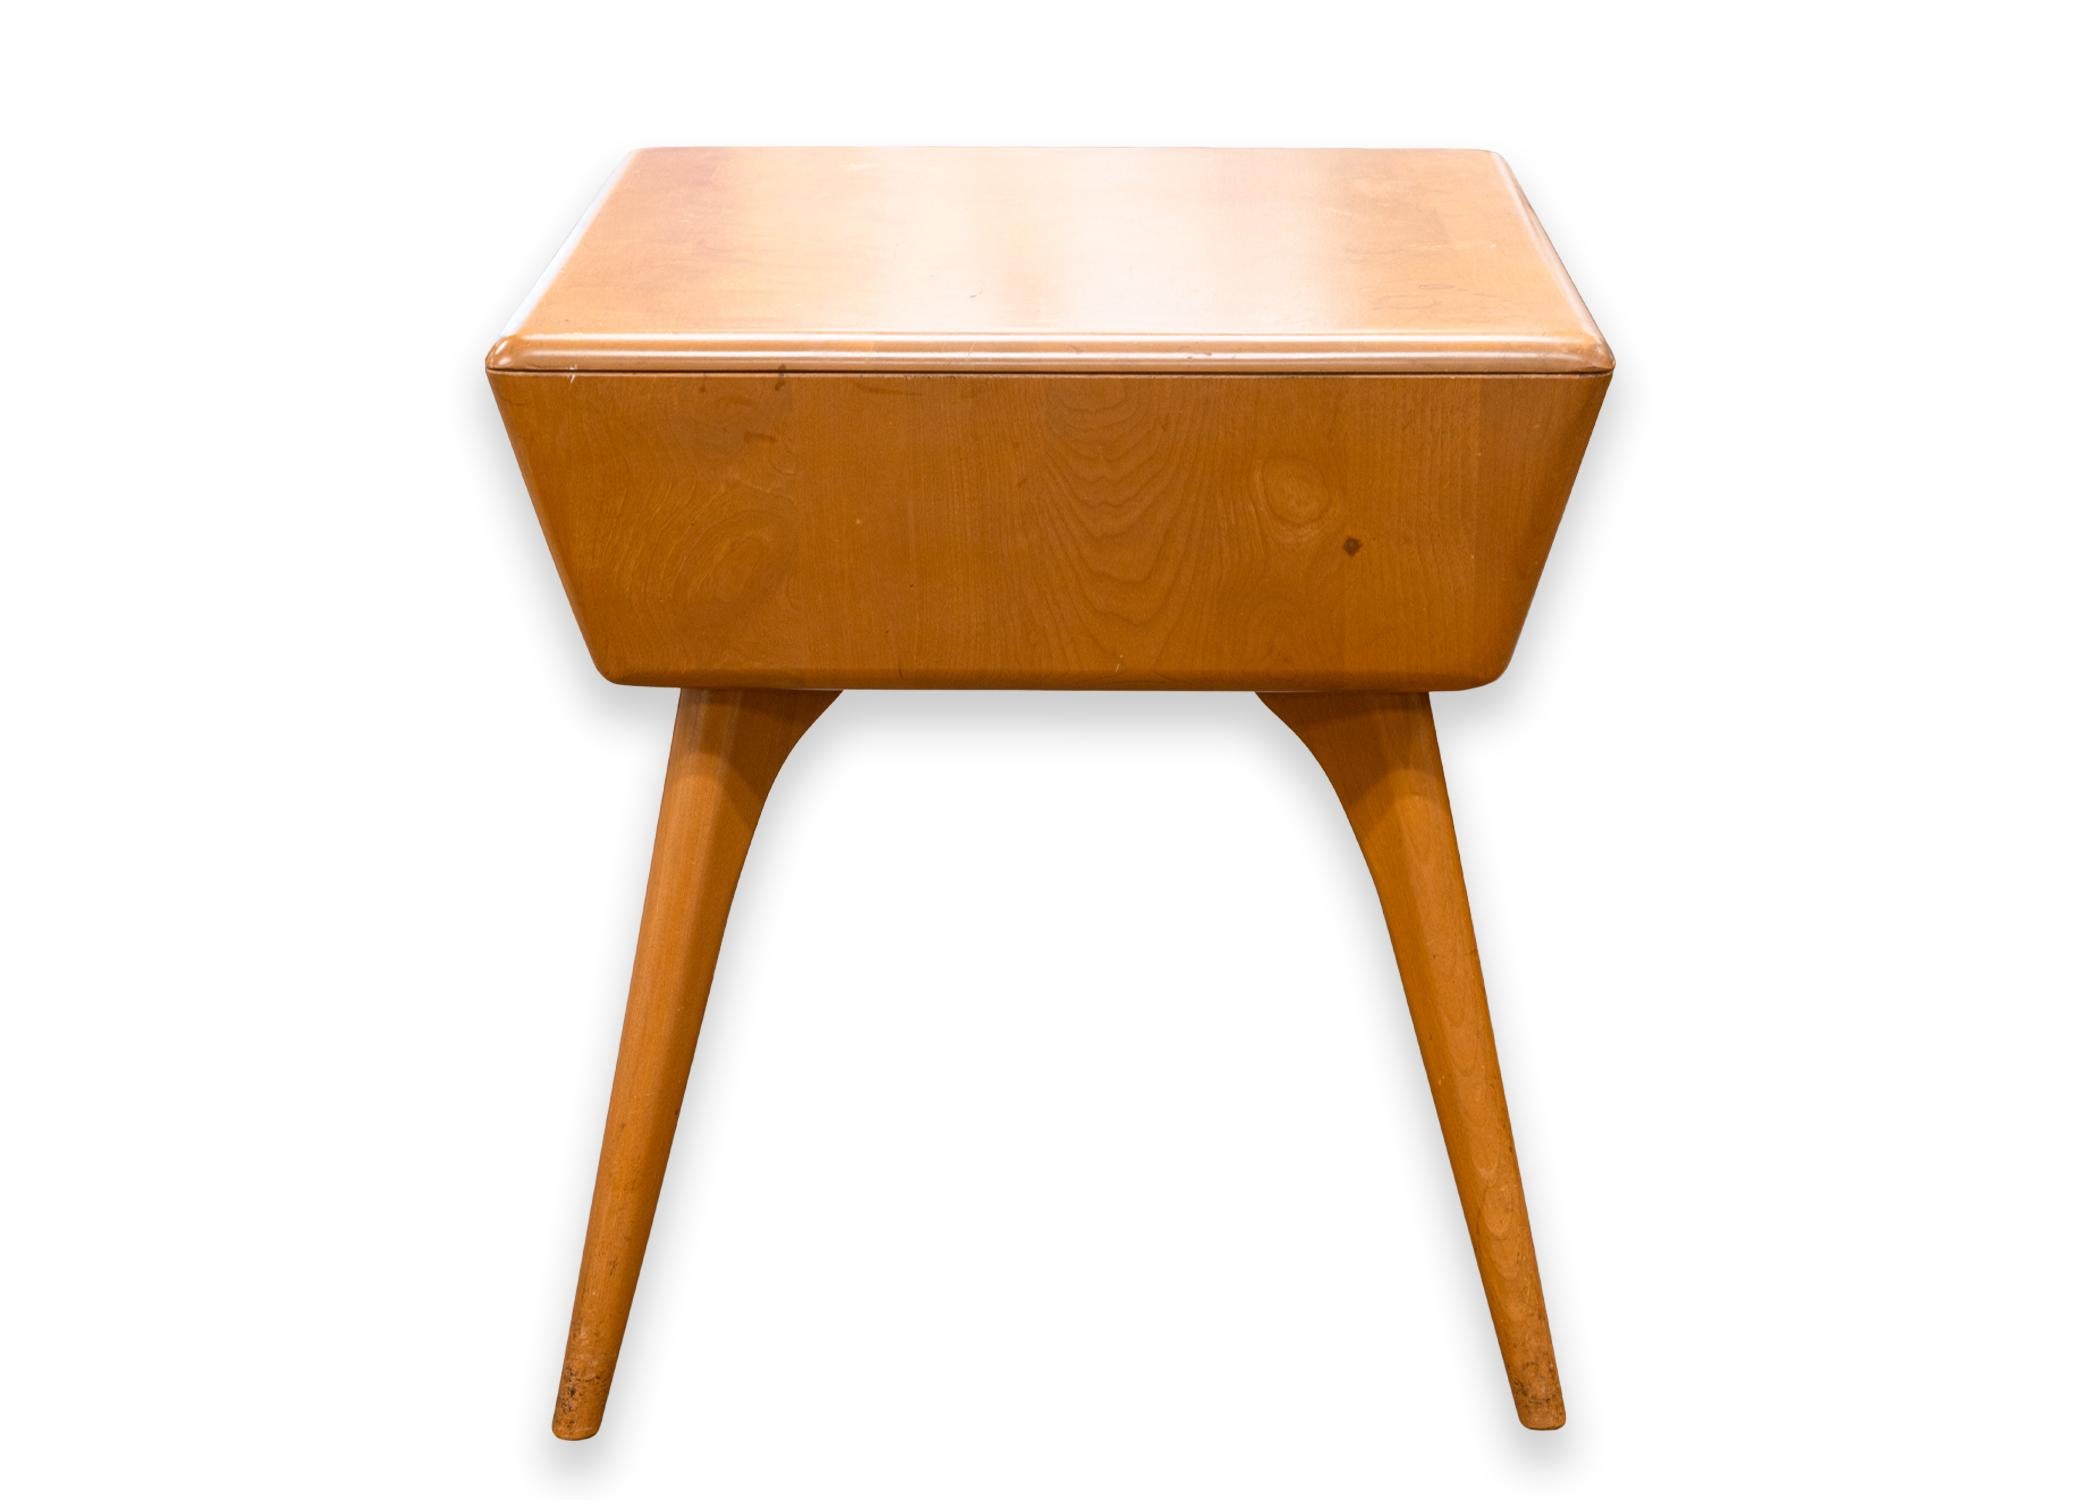 A Heywood Wakefield Encore side end table. A lovely mid century piece of furniture featuring a solid wood construction with a Champagne wood finish, rounded legs, and a versatile open storage compartment. This table is stamped on the underside with